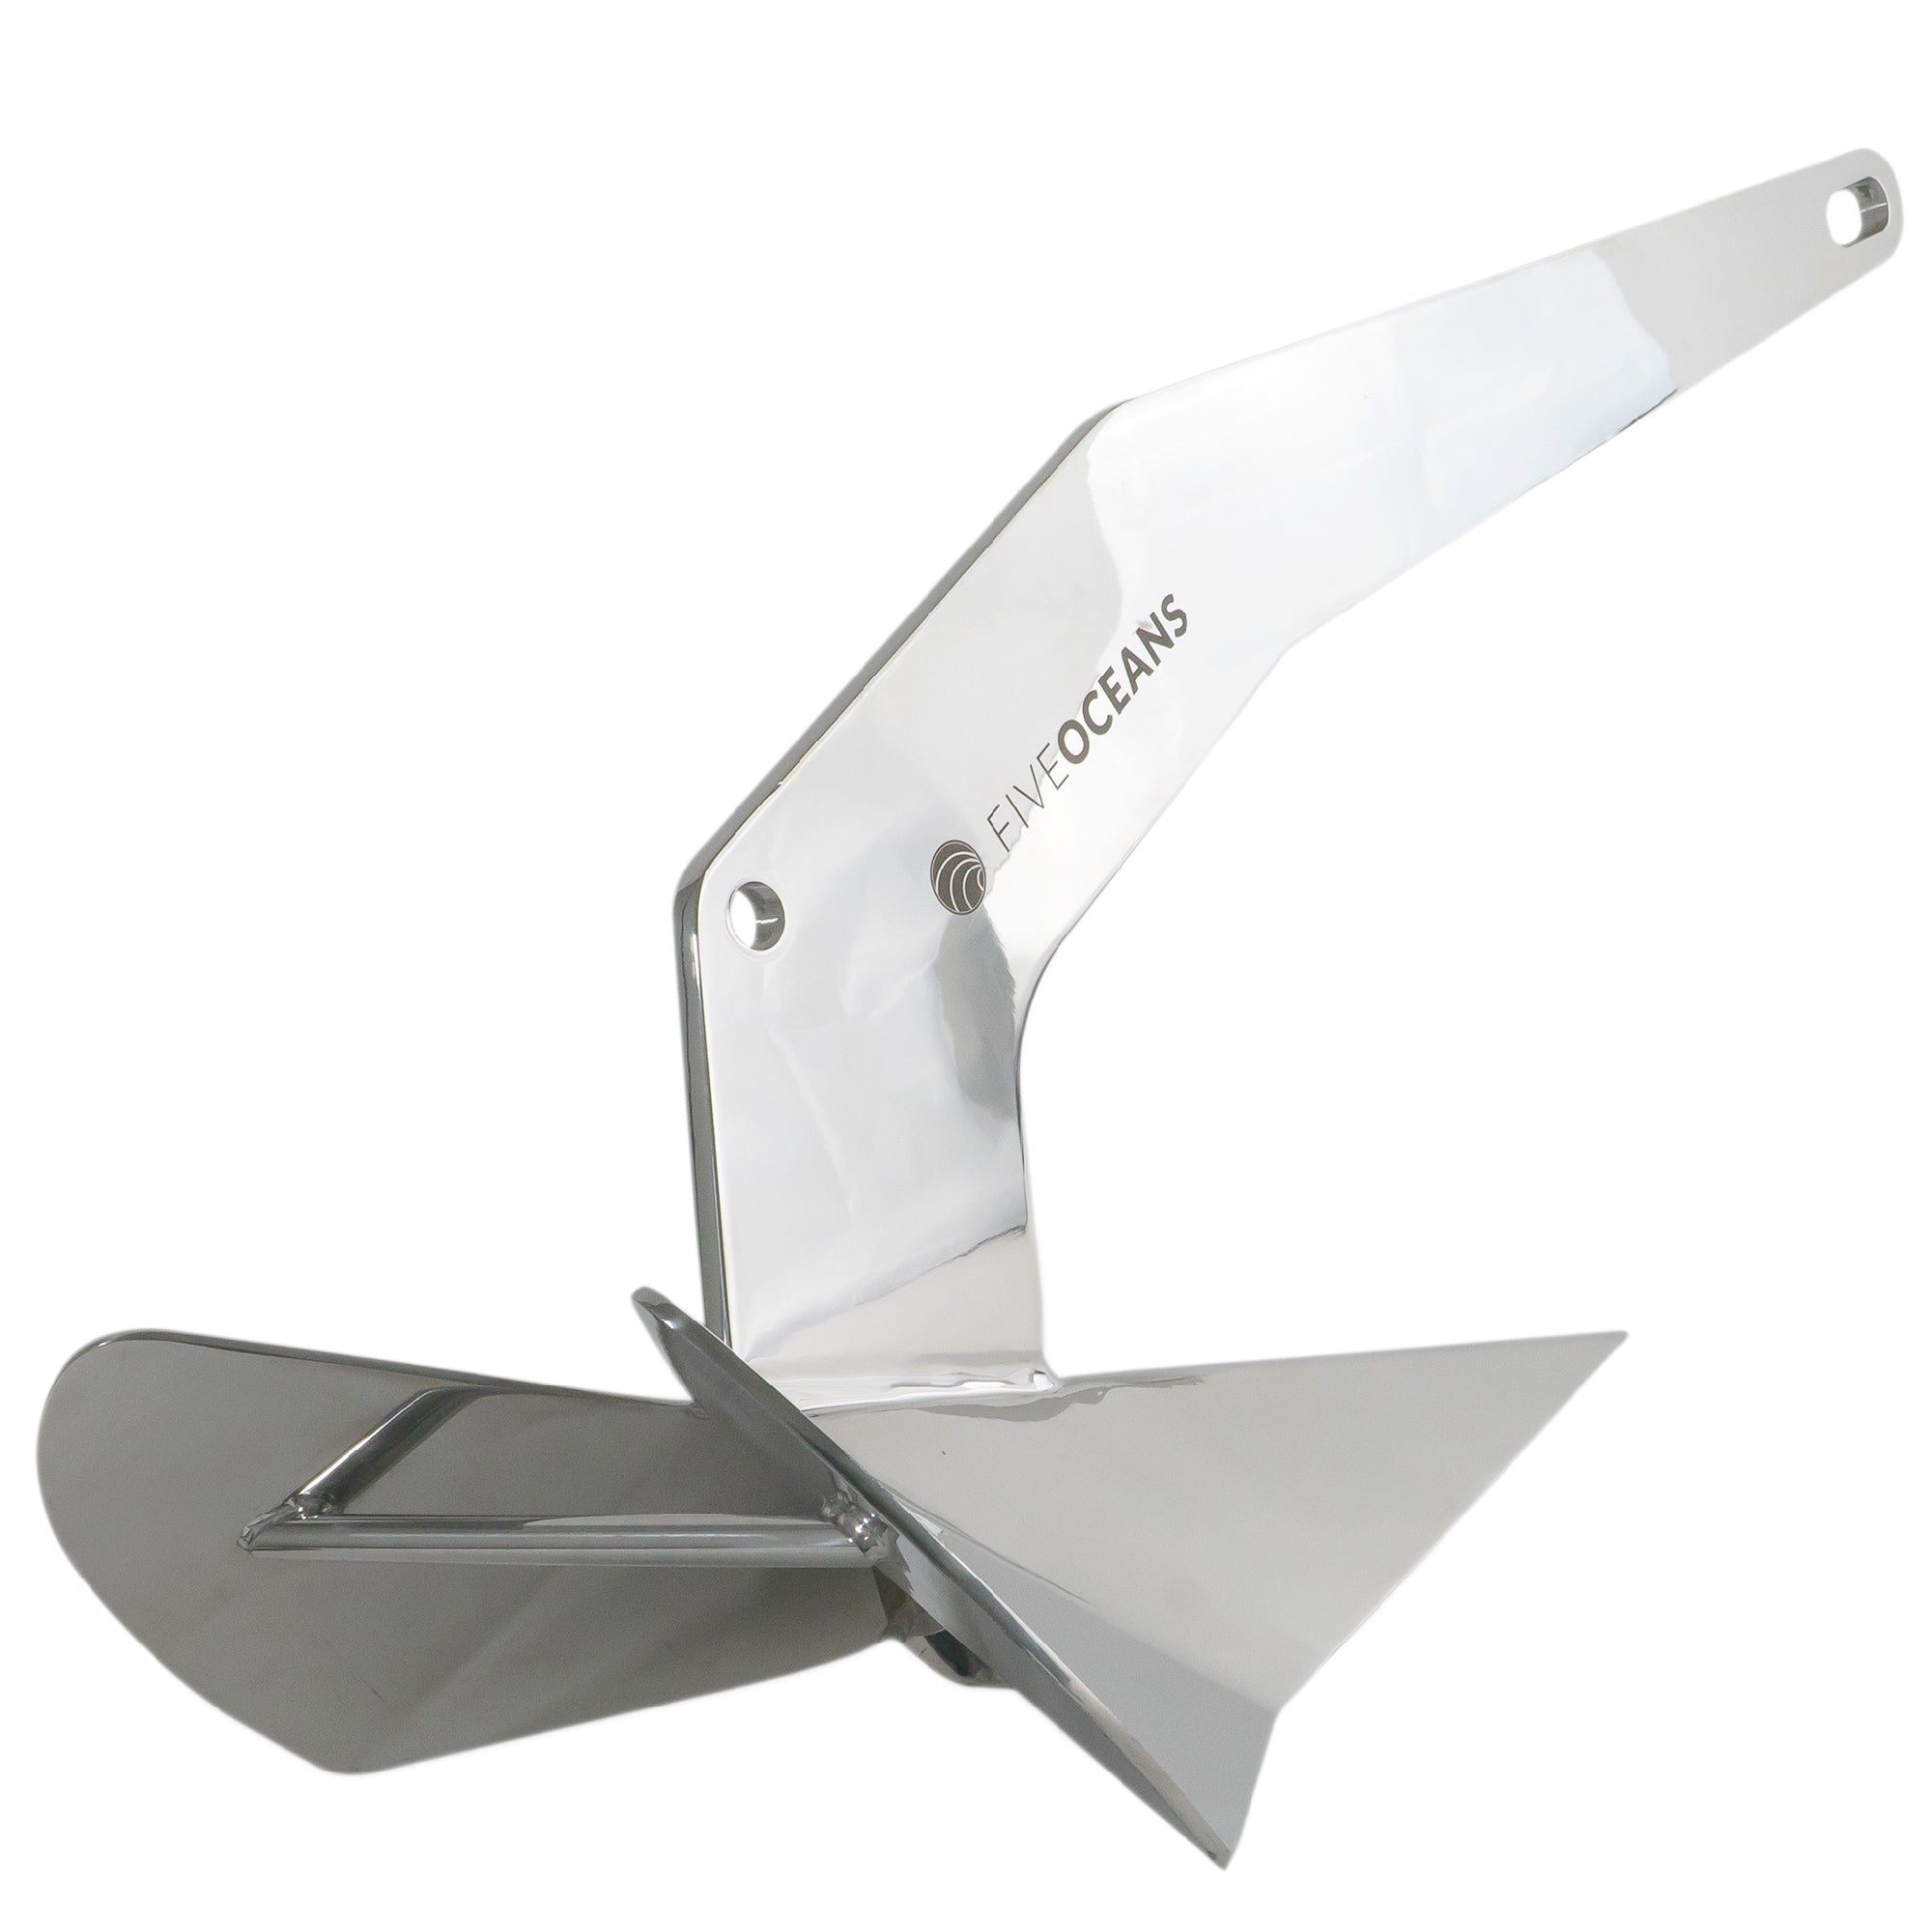 Delta Style Wing Anchor, 13 Lb,  Stainless Steel - FO4447